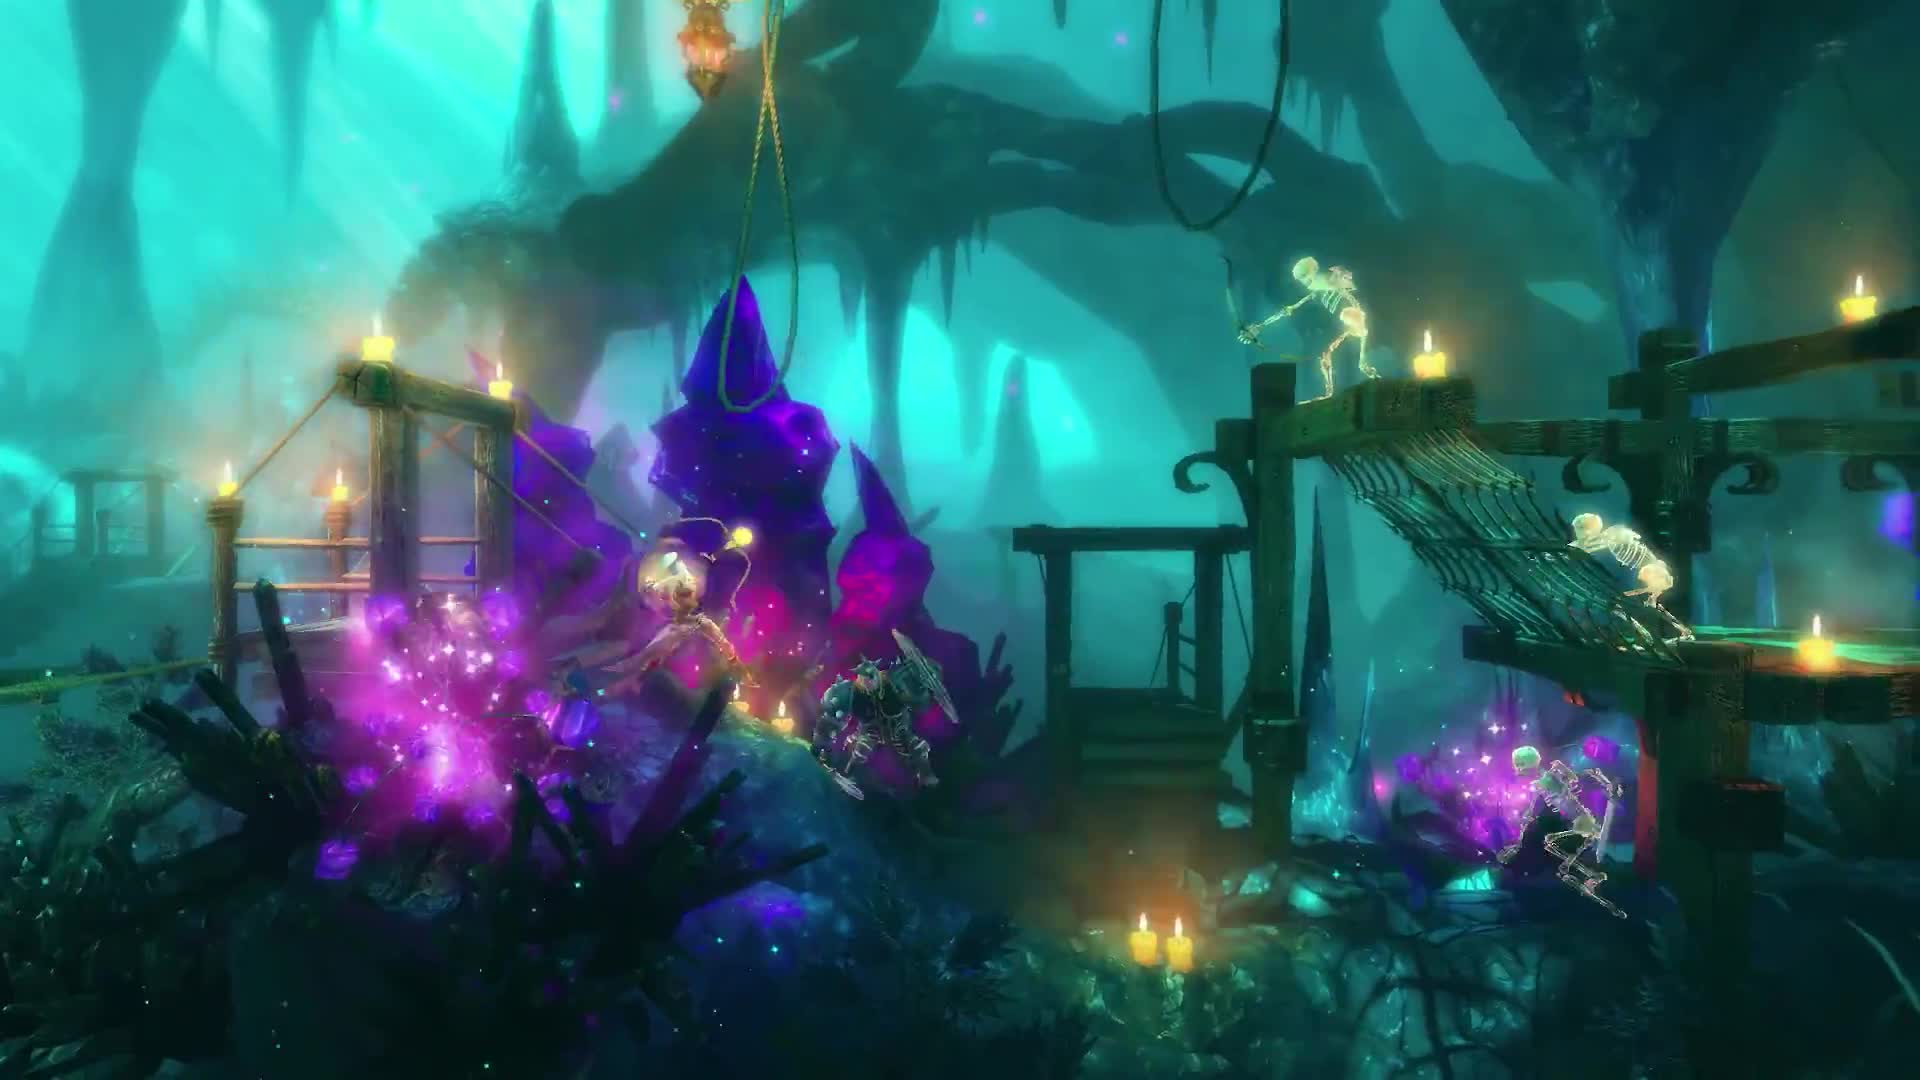 trine enchanted edition local co op